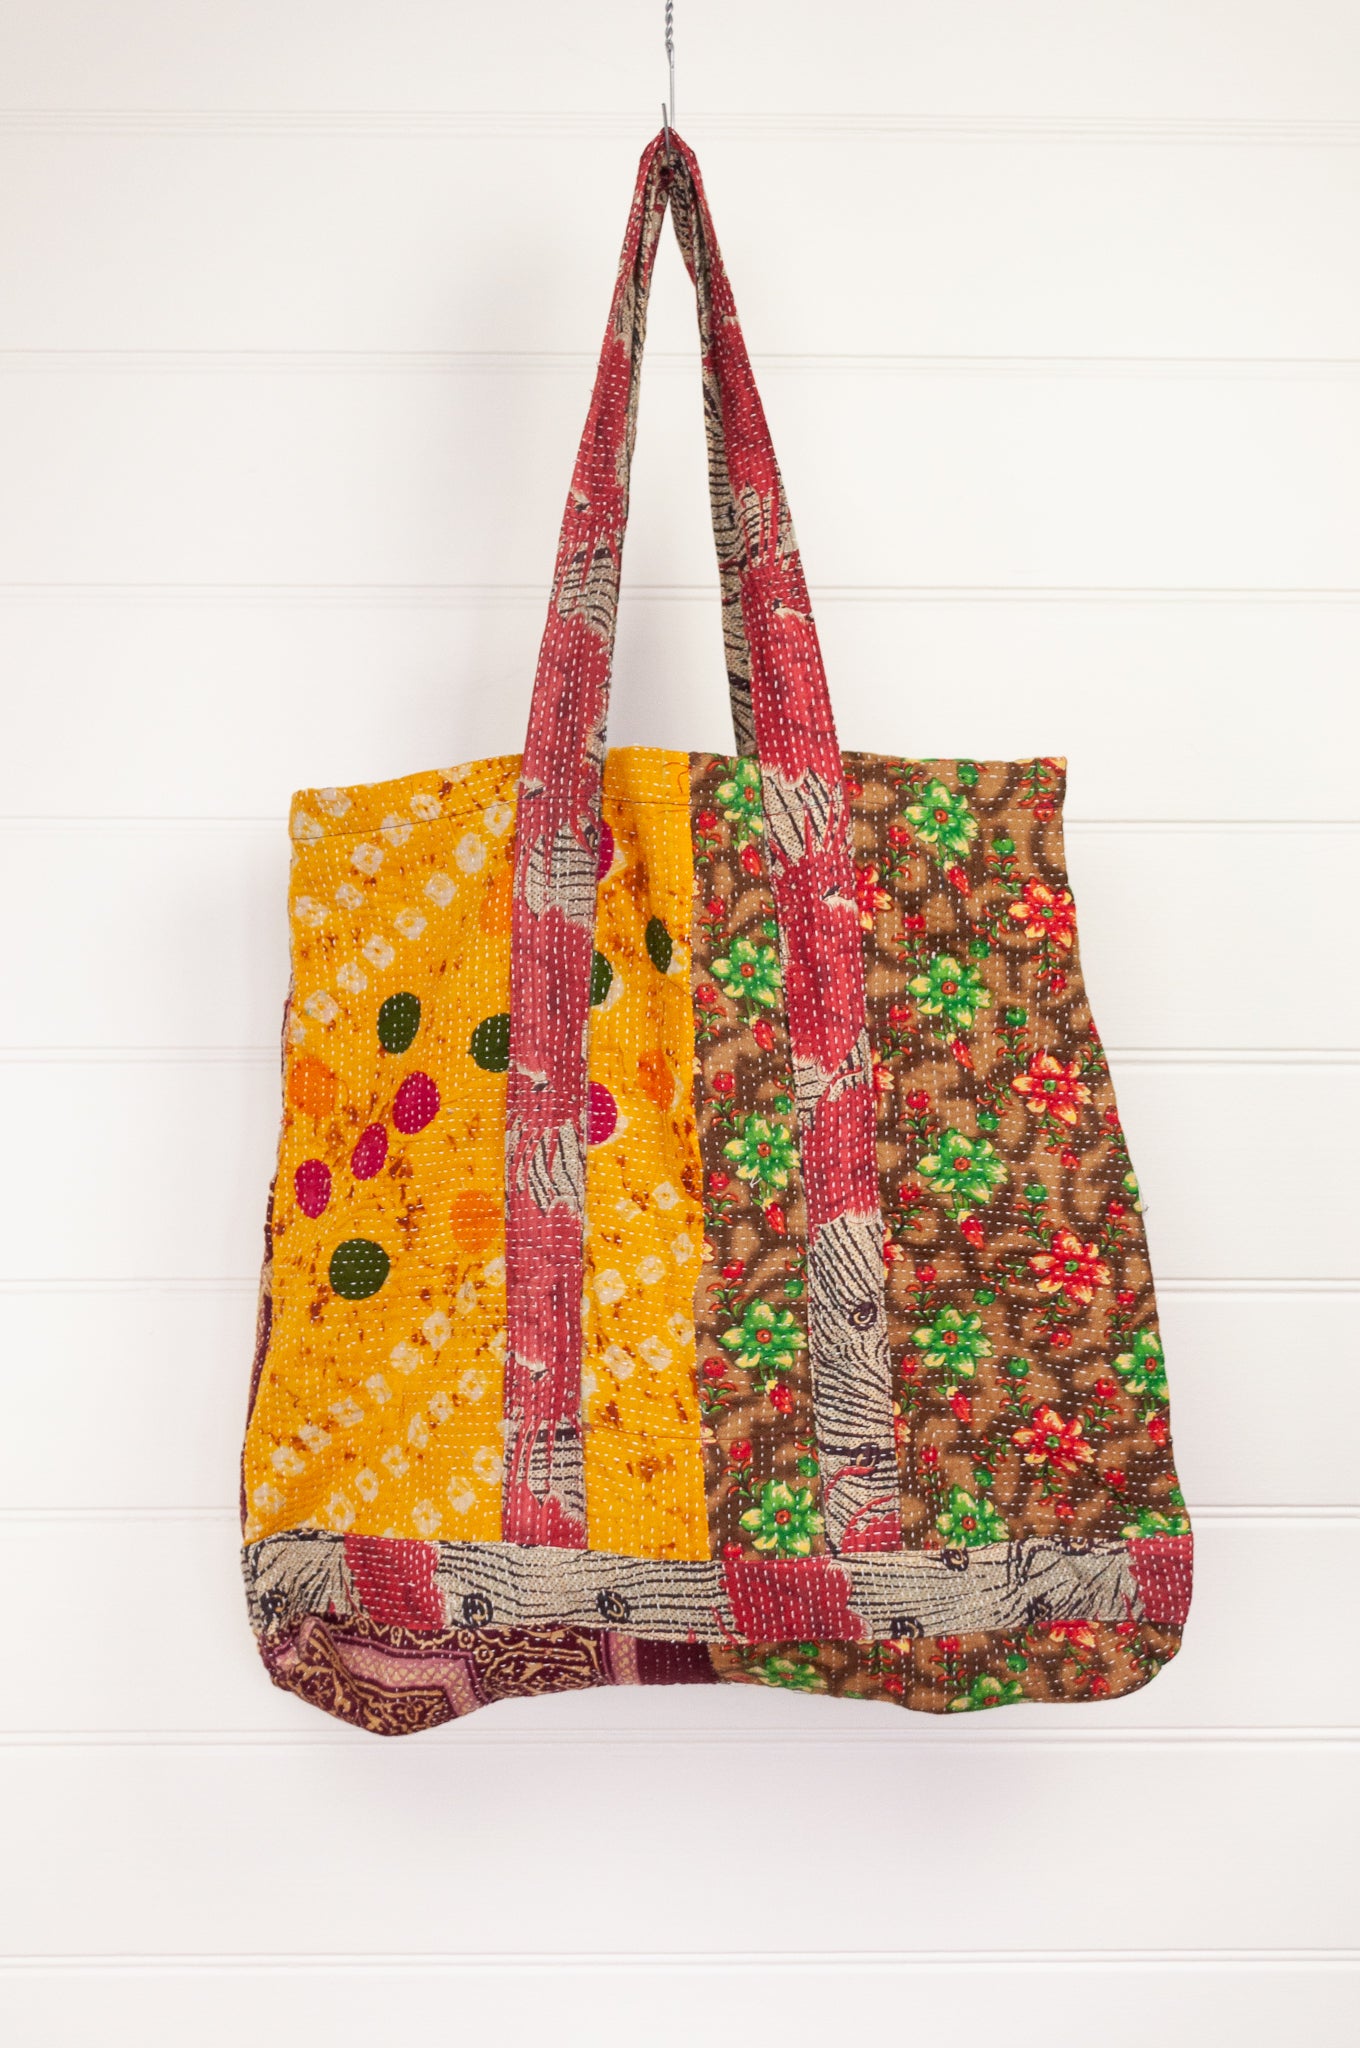 Vintage kantha tote bag with internal pocket, multi patterned and multi coloured, flowers and dots in red, green, gold and brown.